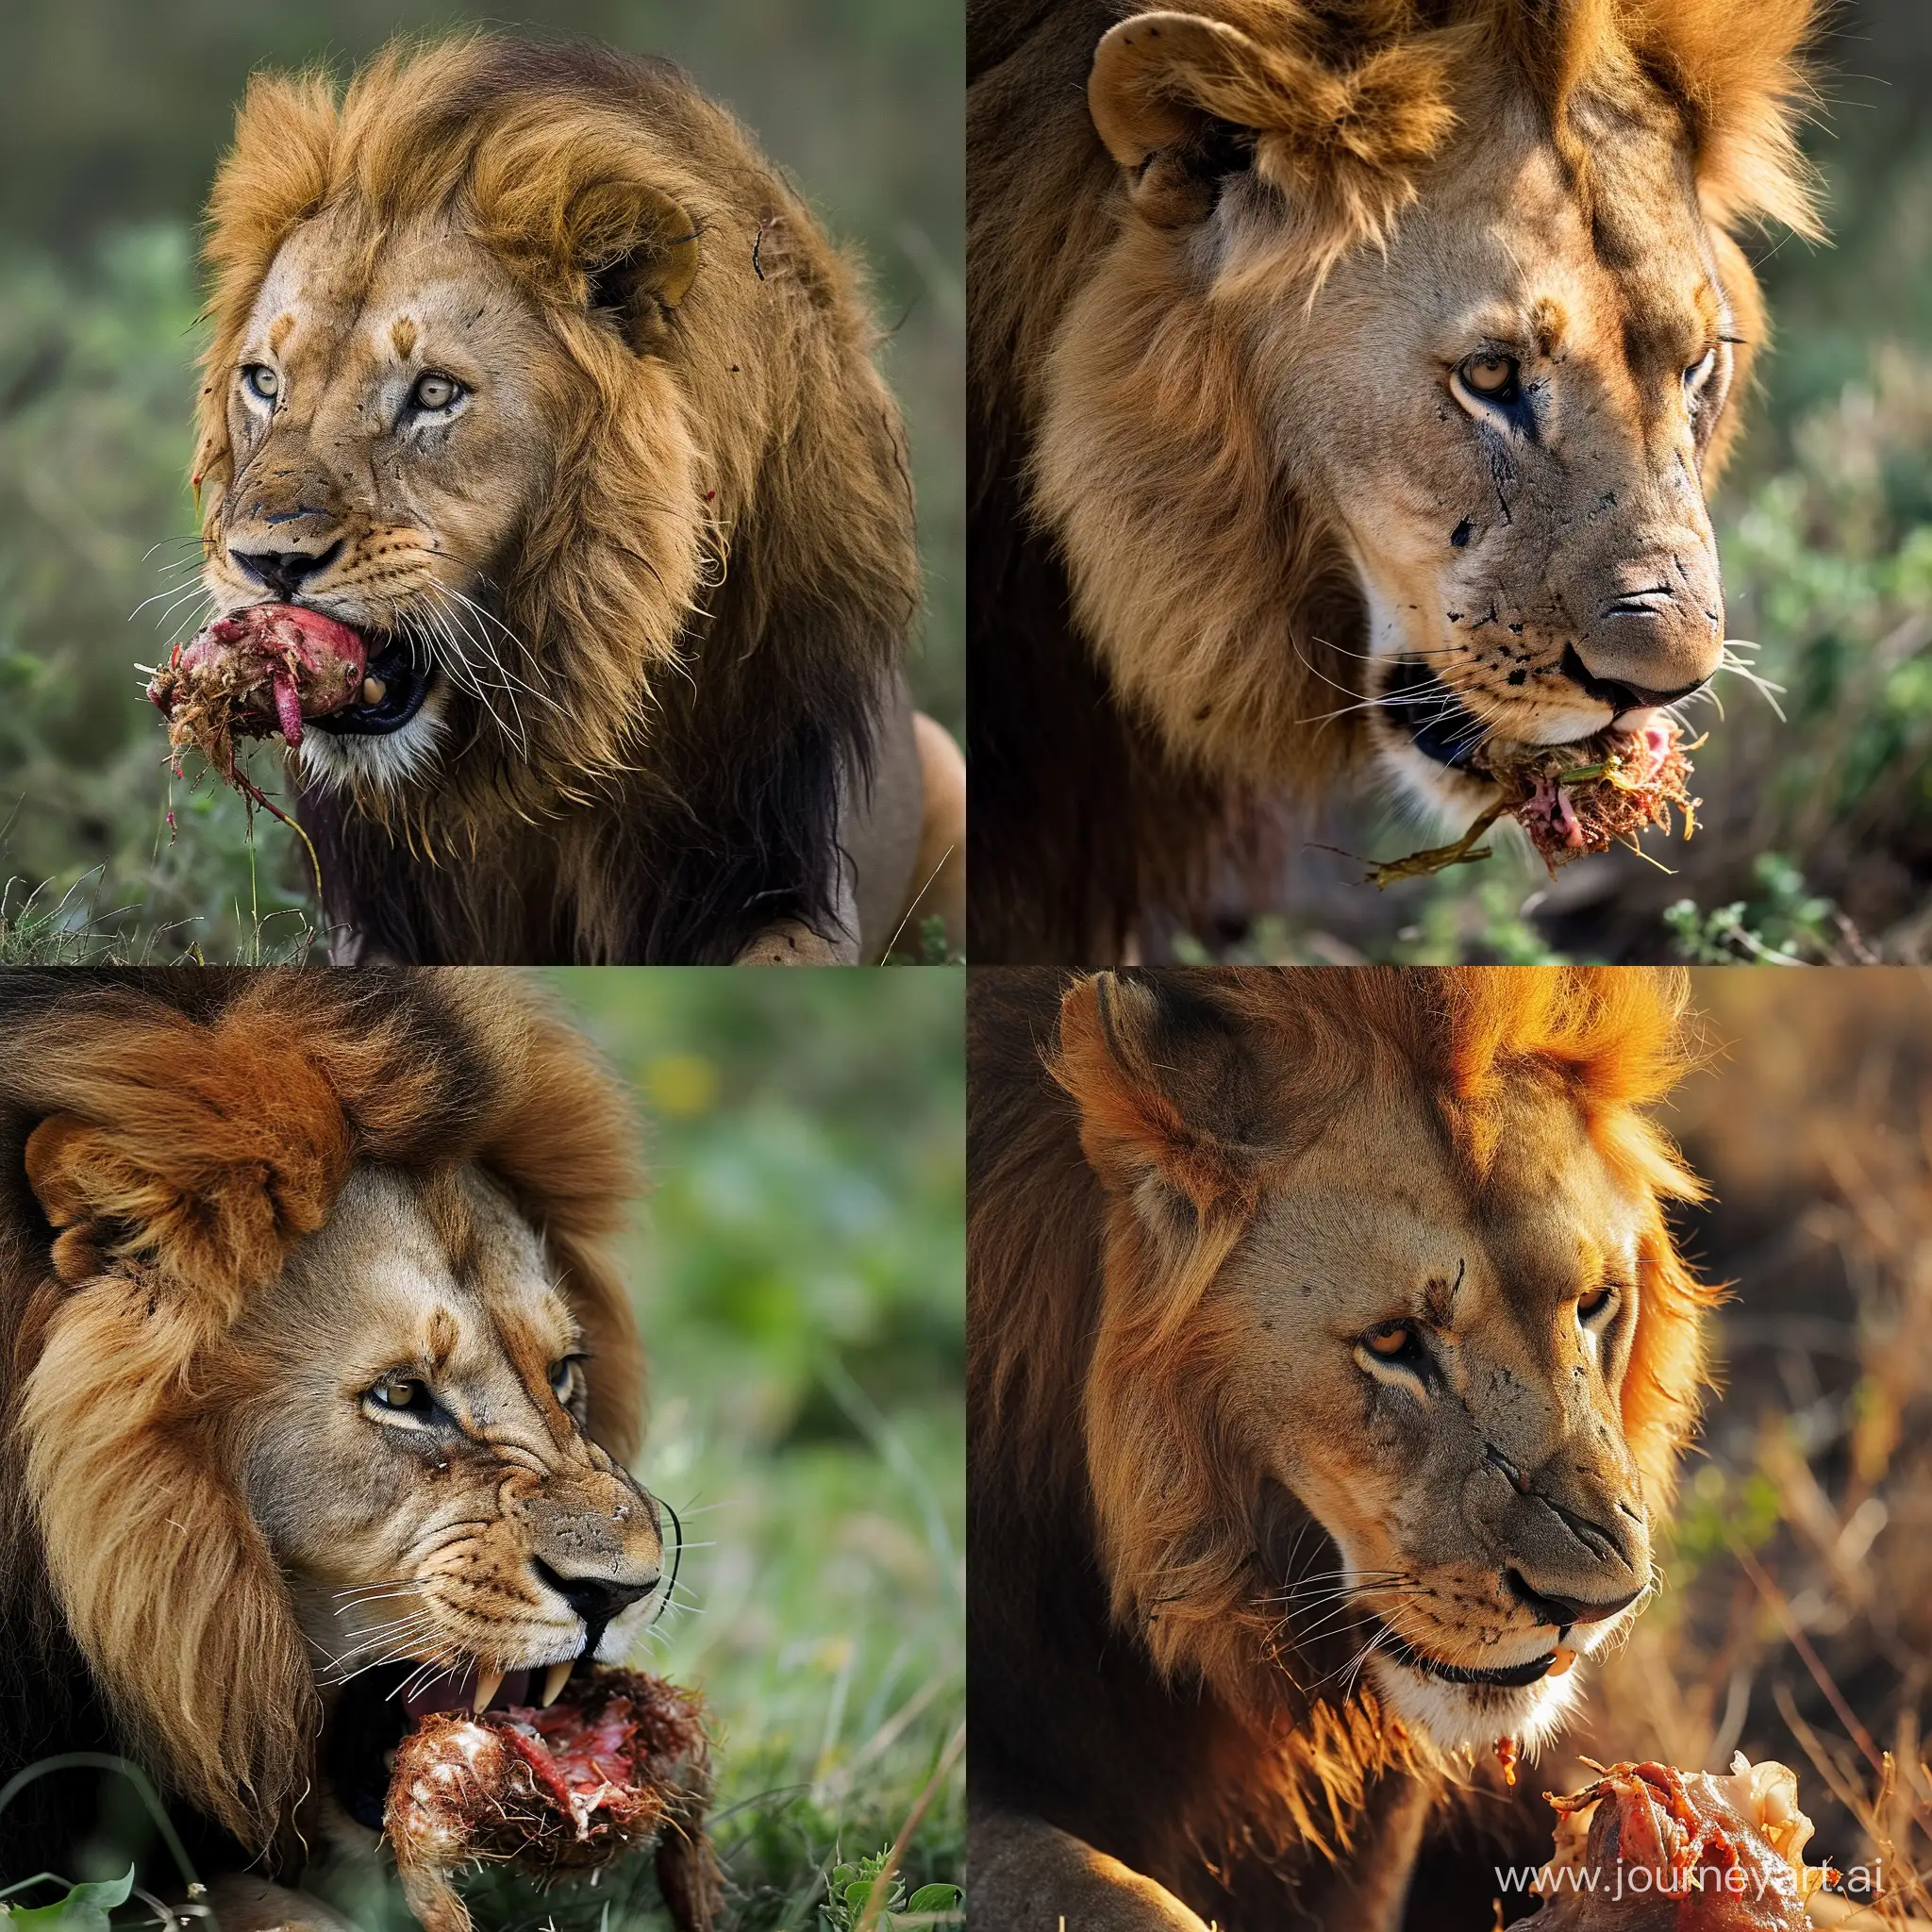 Majestic-Lion-Capturing-Prey-in-Stunning-Photograph